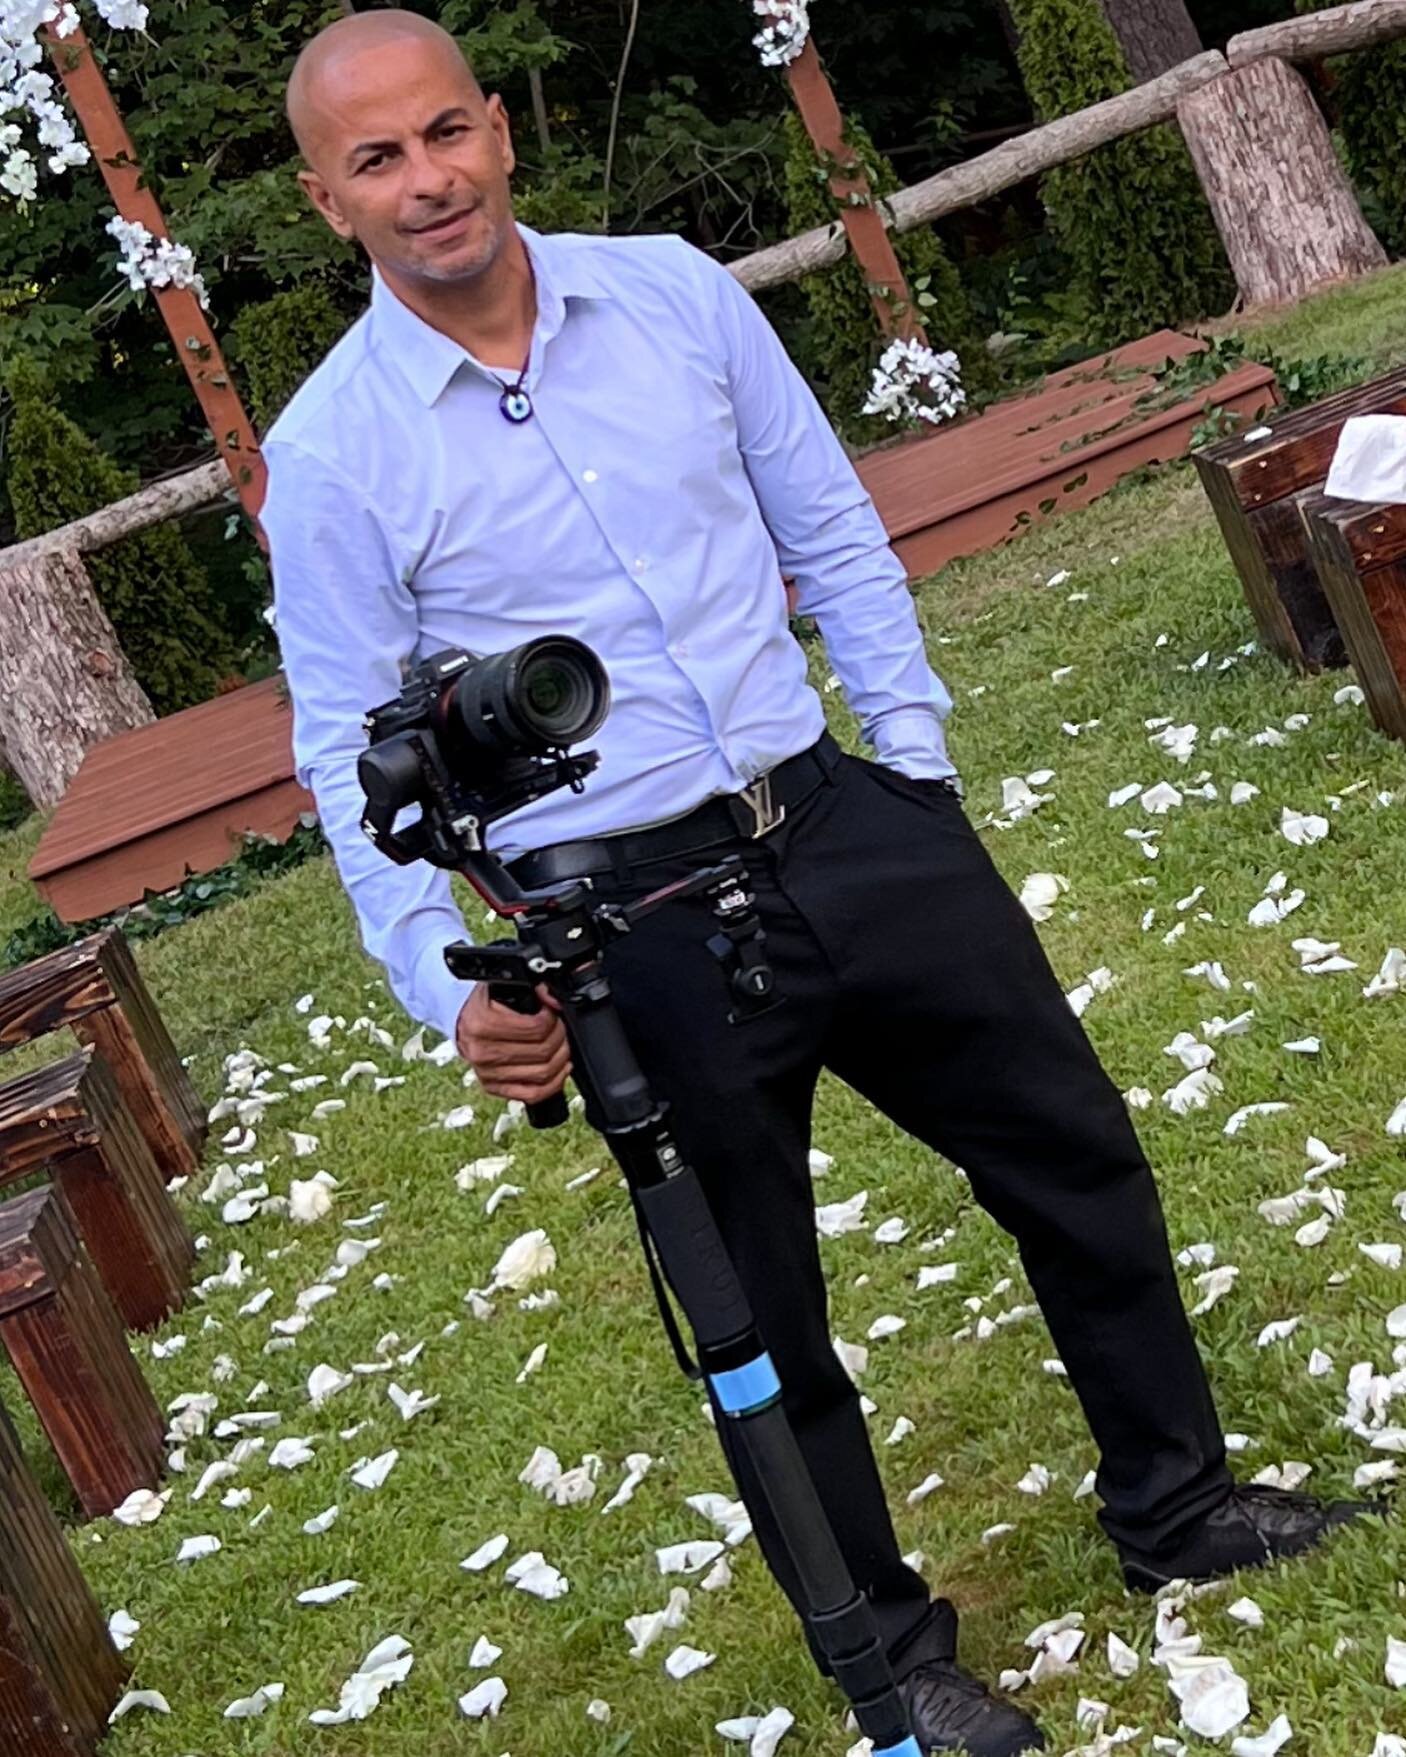 Your wedding cinematographer always ready to shoot your 4 k Films
Crafting your story in real time!

www.weddingsinnergystudios.com

#weddingcinematographer 
#topweddingvideographer 
#topweddingphotographer 
#storytelling 
#storytellingweddings 
#wed